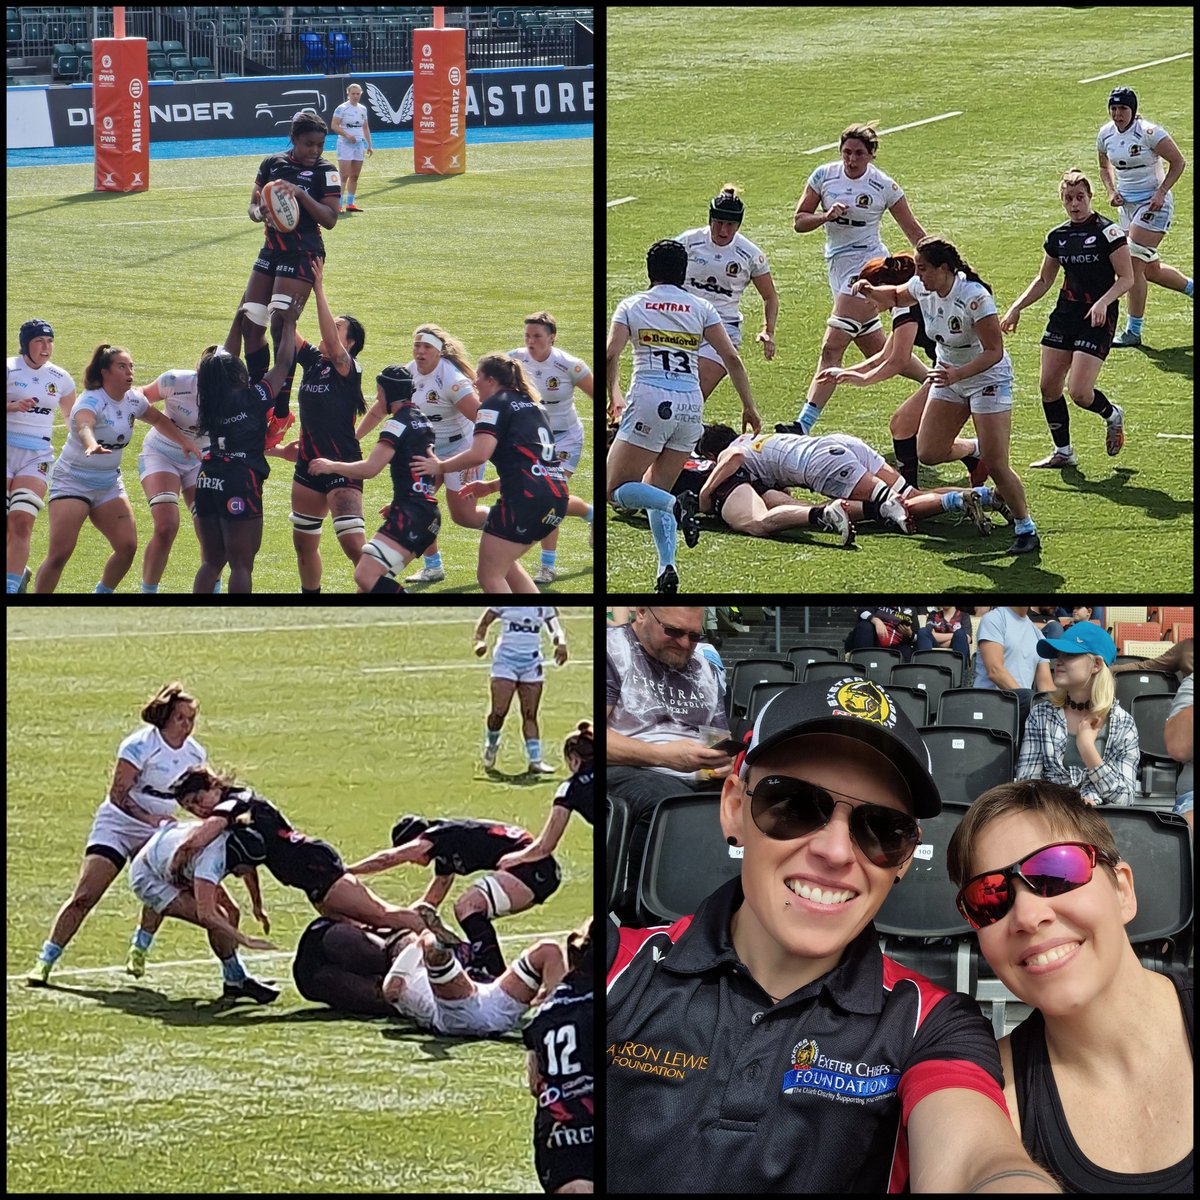 What a game yesterday at Stonex. Our chiefs played one heck of a game & almost took the game💪🖤 But congrats to Sarries, who just took it from the 1st half. Rather a lot of yellow cards in 1 half. I'm not sure I can see why, but that's why I'm not a ref ☺️ @ExeChiefsWomen